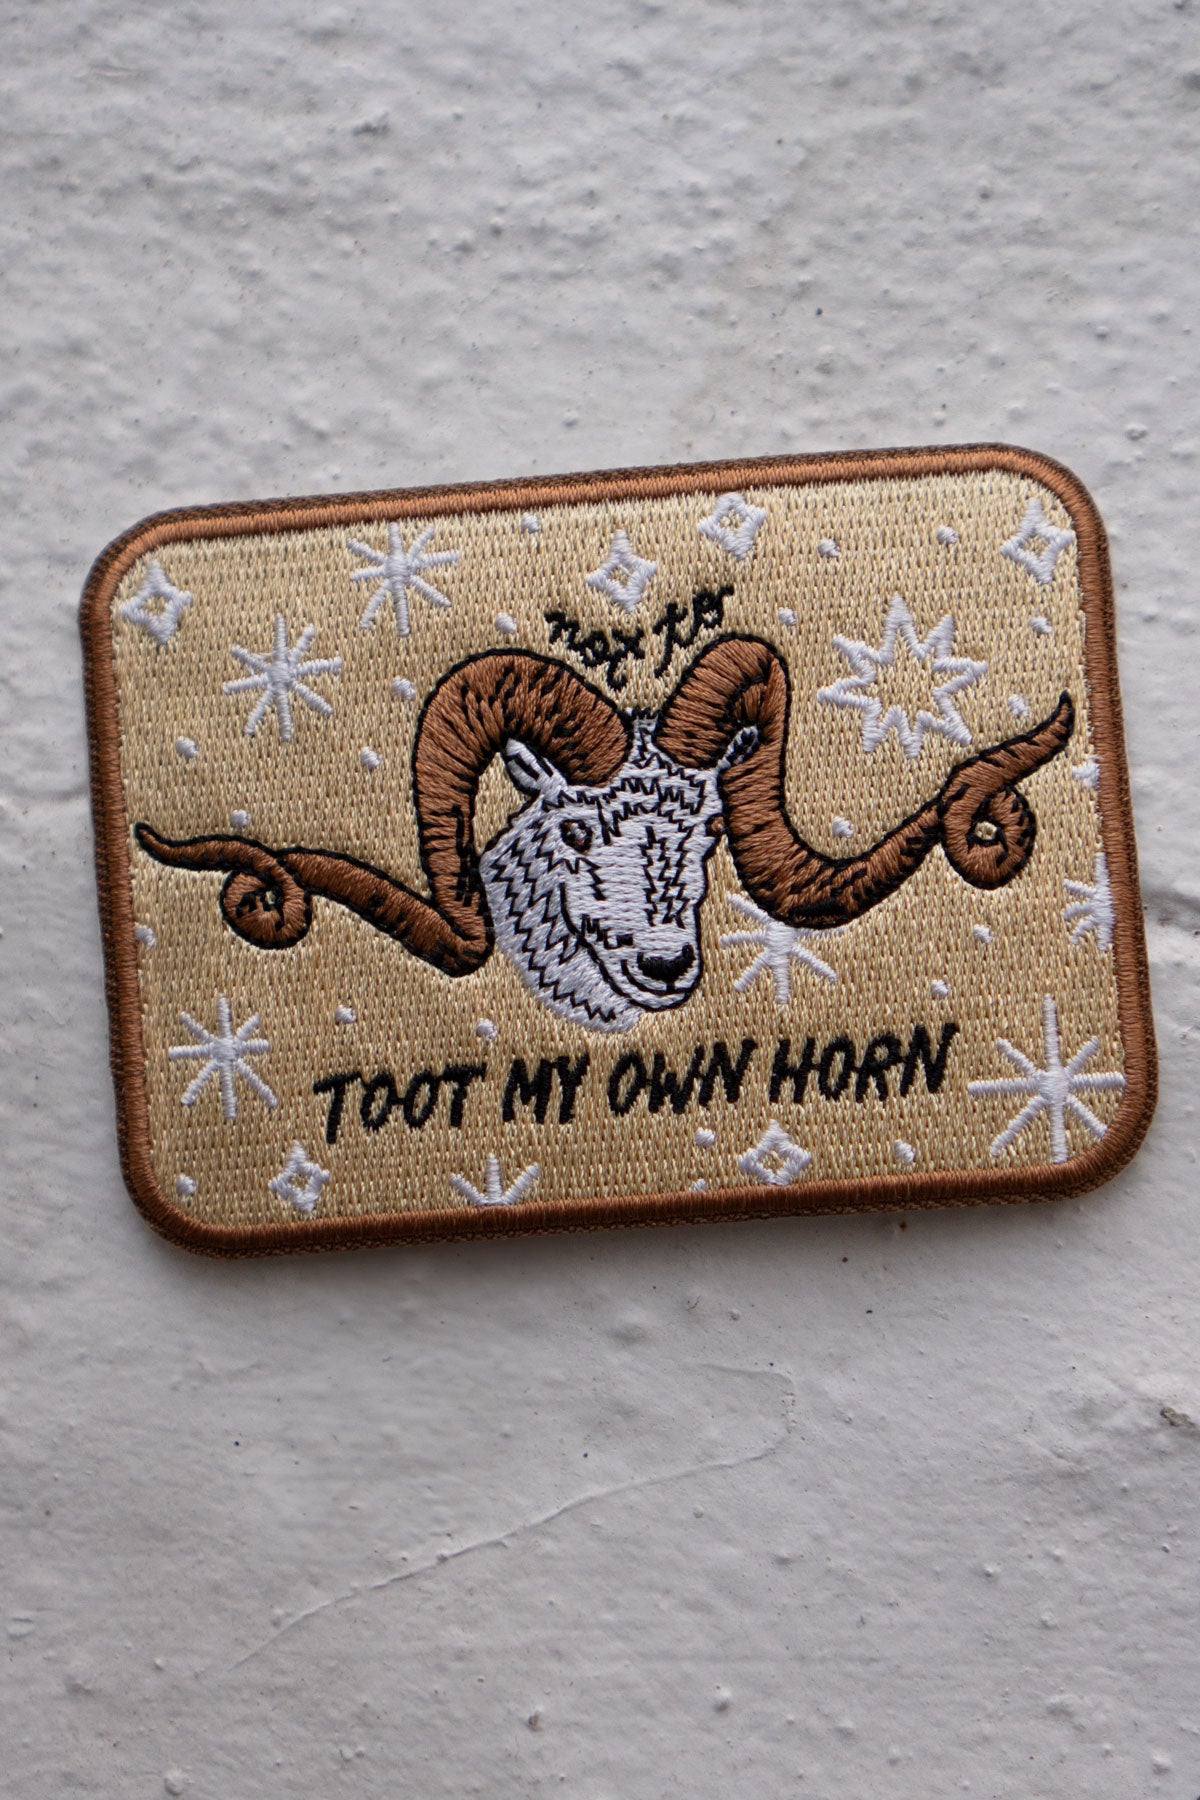 Toot My Own Horn - Sticky Patch